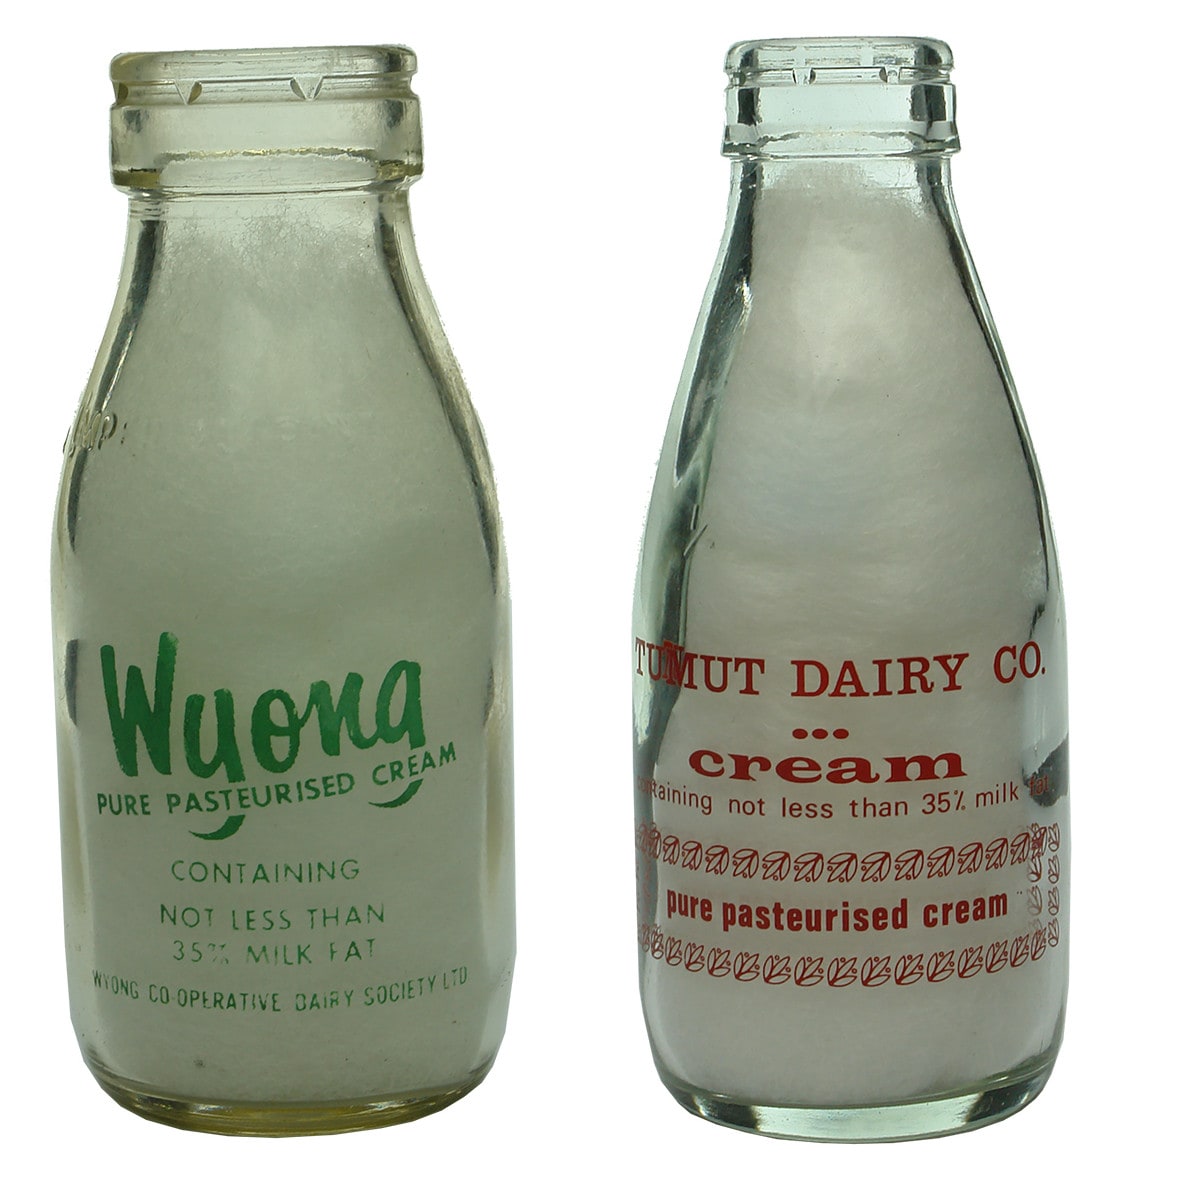 Pair of Cream Bottles: Wyong Co-operative Dairy; Tumut Dairy Co. (New South Wales)